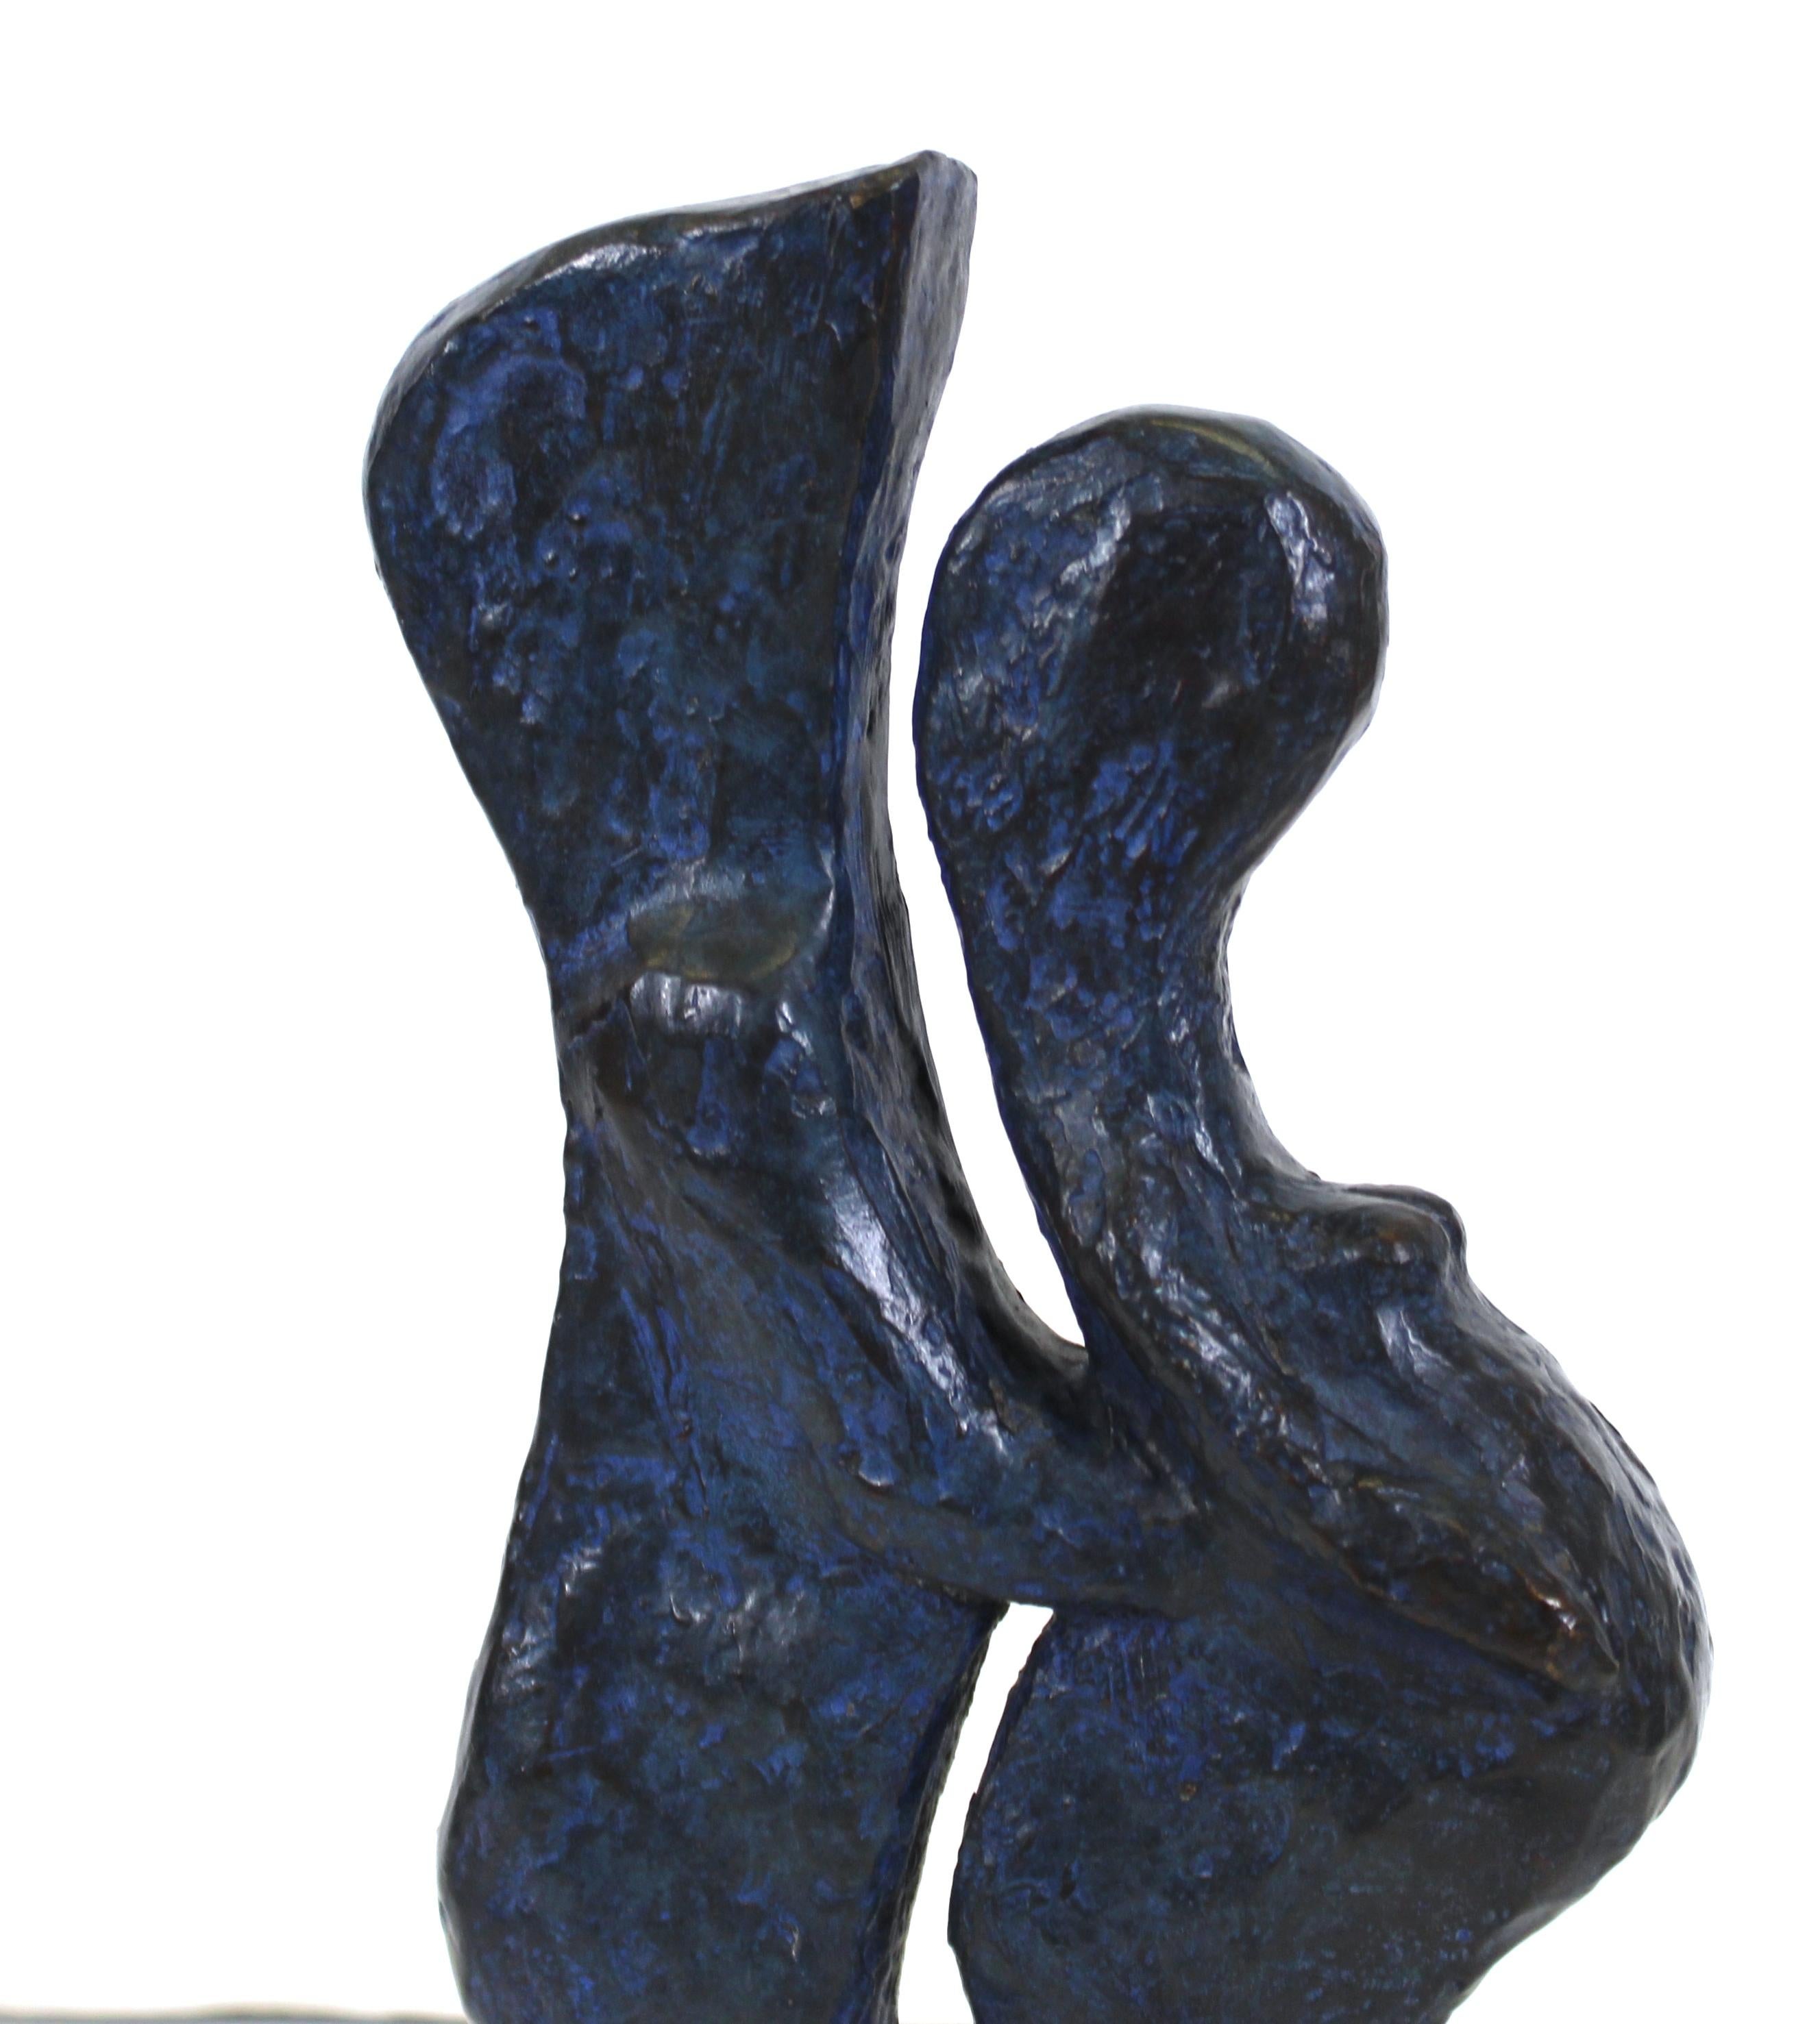 Modern abstract bronze sculpture of a couple in embrace, the woman appearing pregnant, sculpted by American artist Marvin Bell in 1984. The piece is signed and dated on the base and has the foundry name 'Roma Bronze Works' and edition number '1/21'.